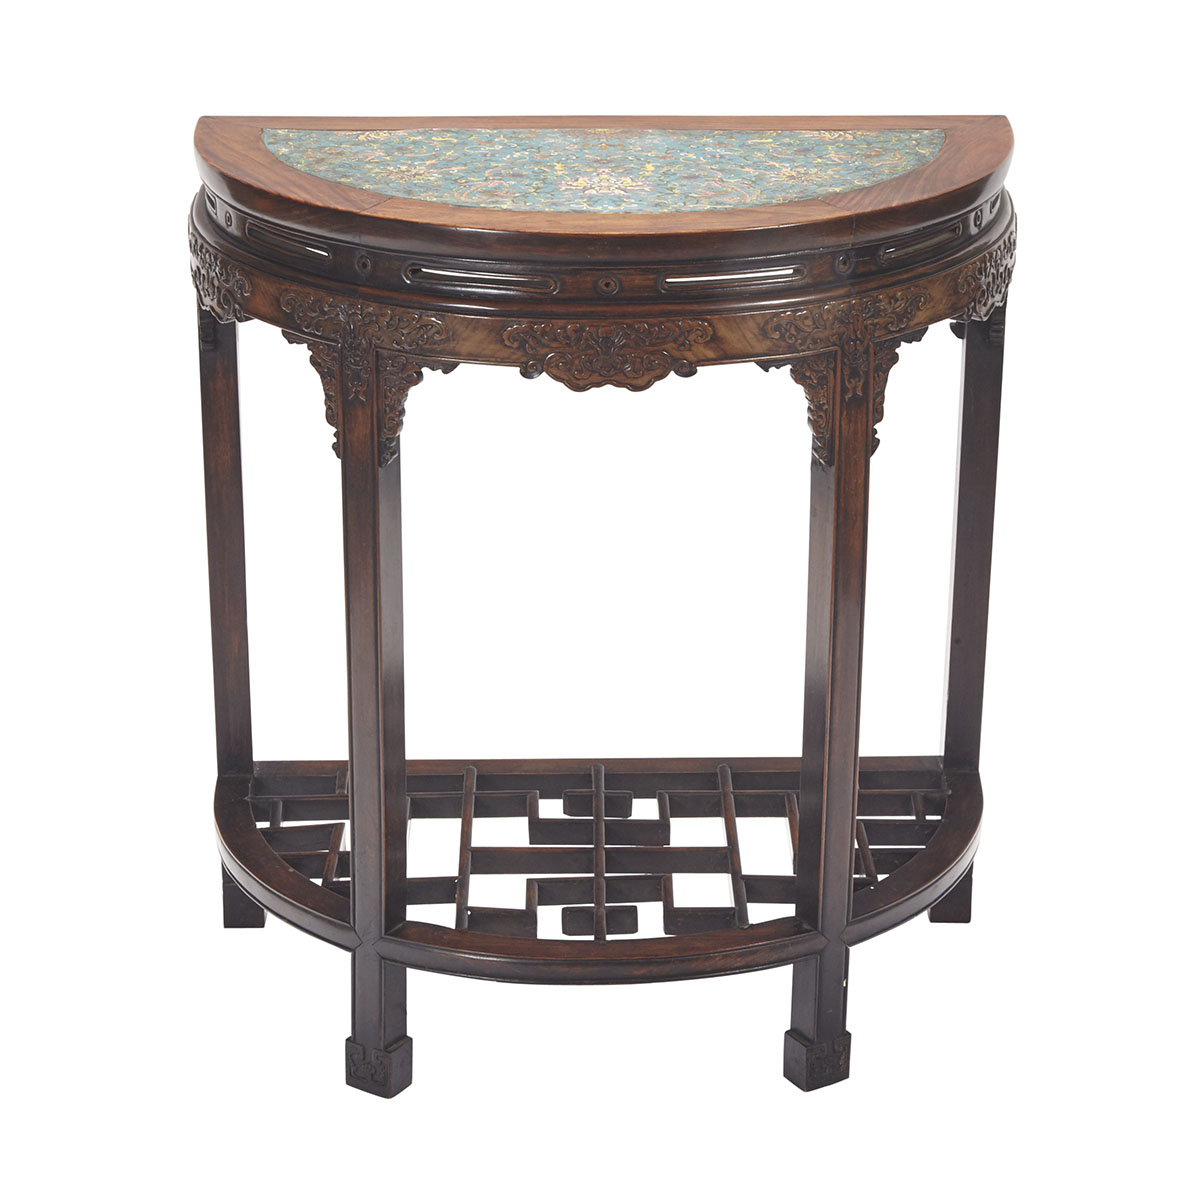 A Cloisonné Mounted Rosewood Demilune Table (Yueyazhuo), 19th Century